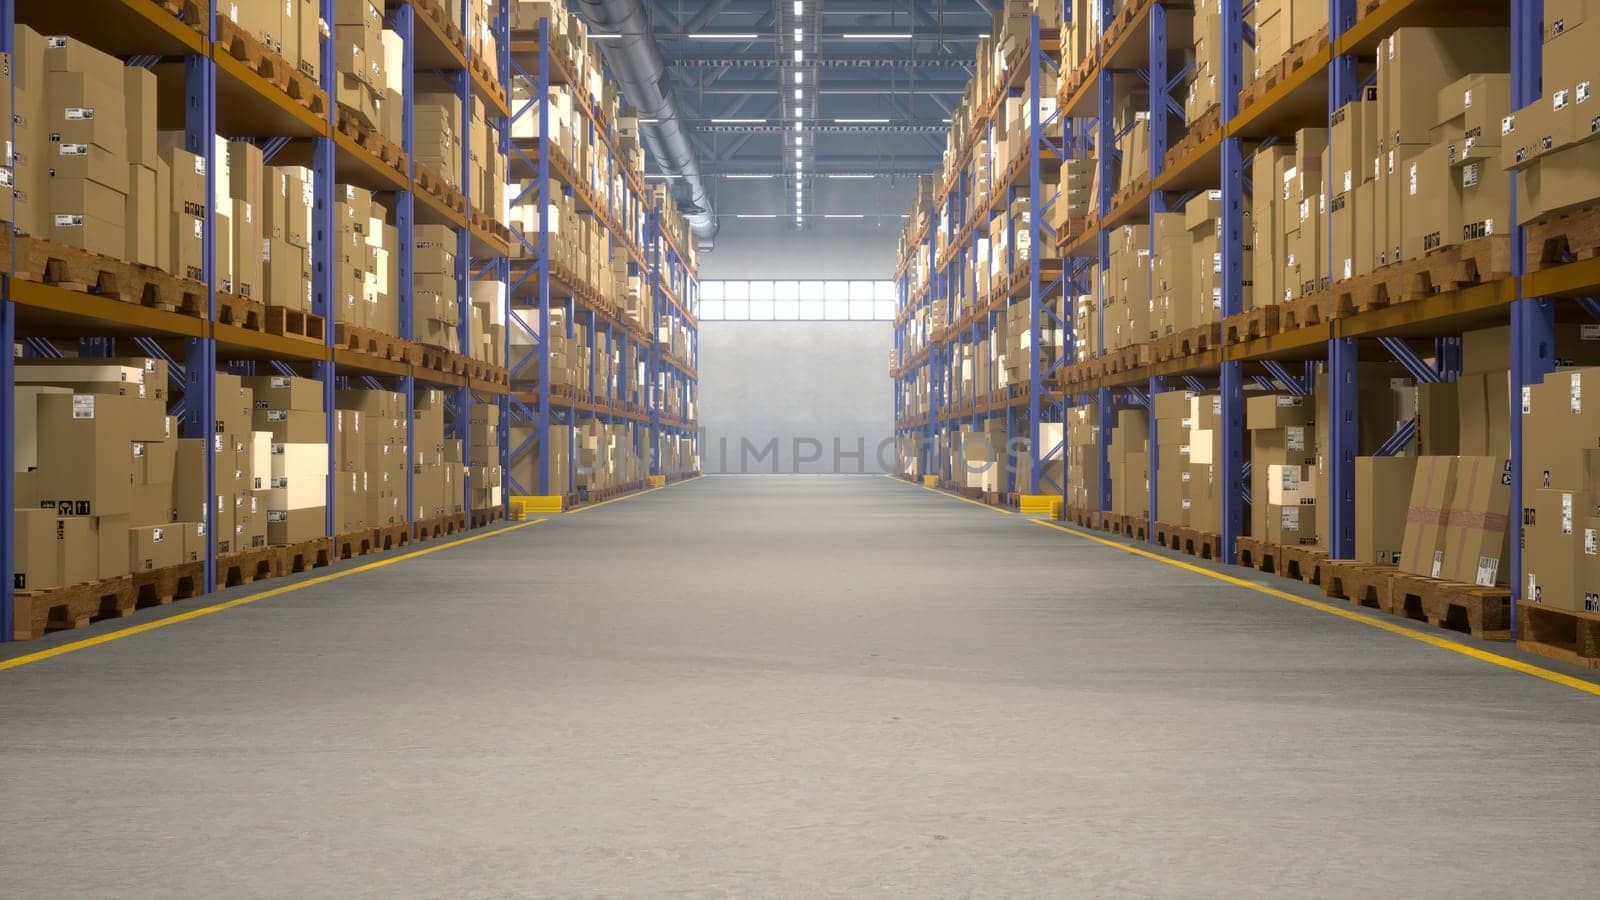 Logistics facility retaining products awaiting distribution and shipping, warehouse racks packed with goods in containers. Storehouse overseeing trade procedures. 3D animation render.